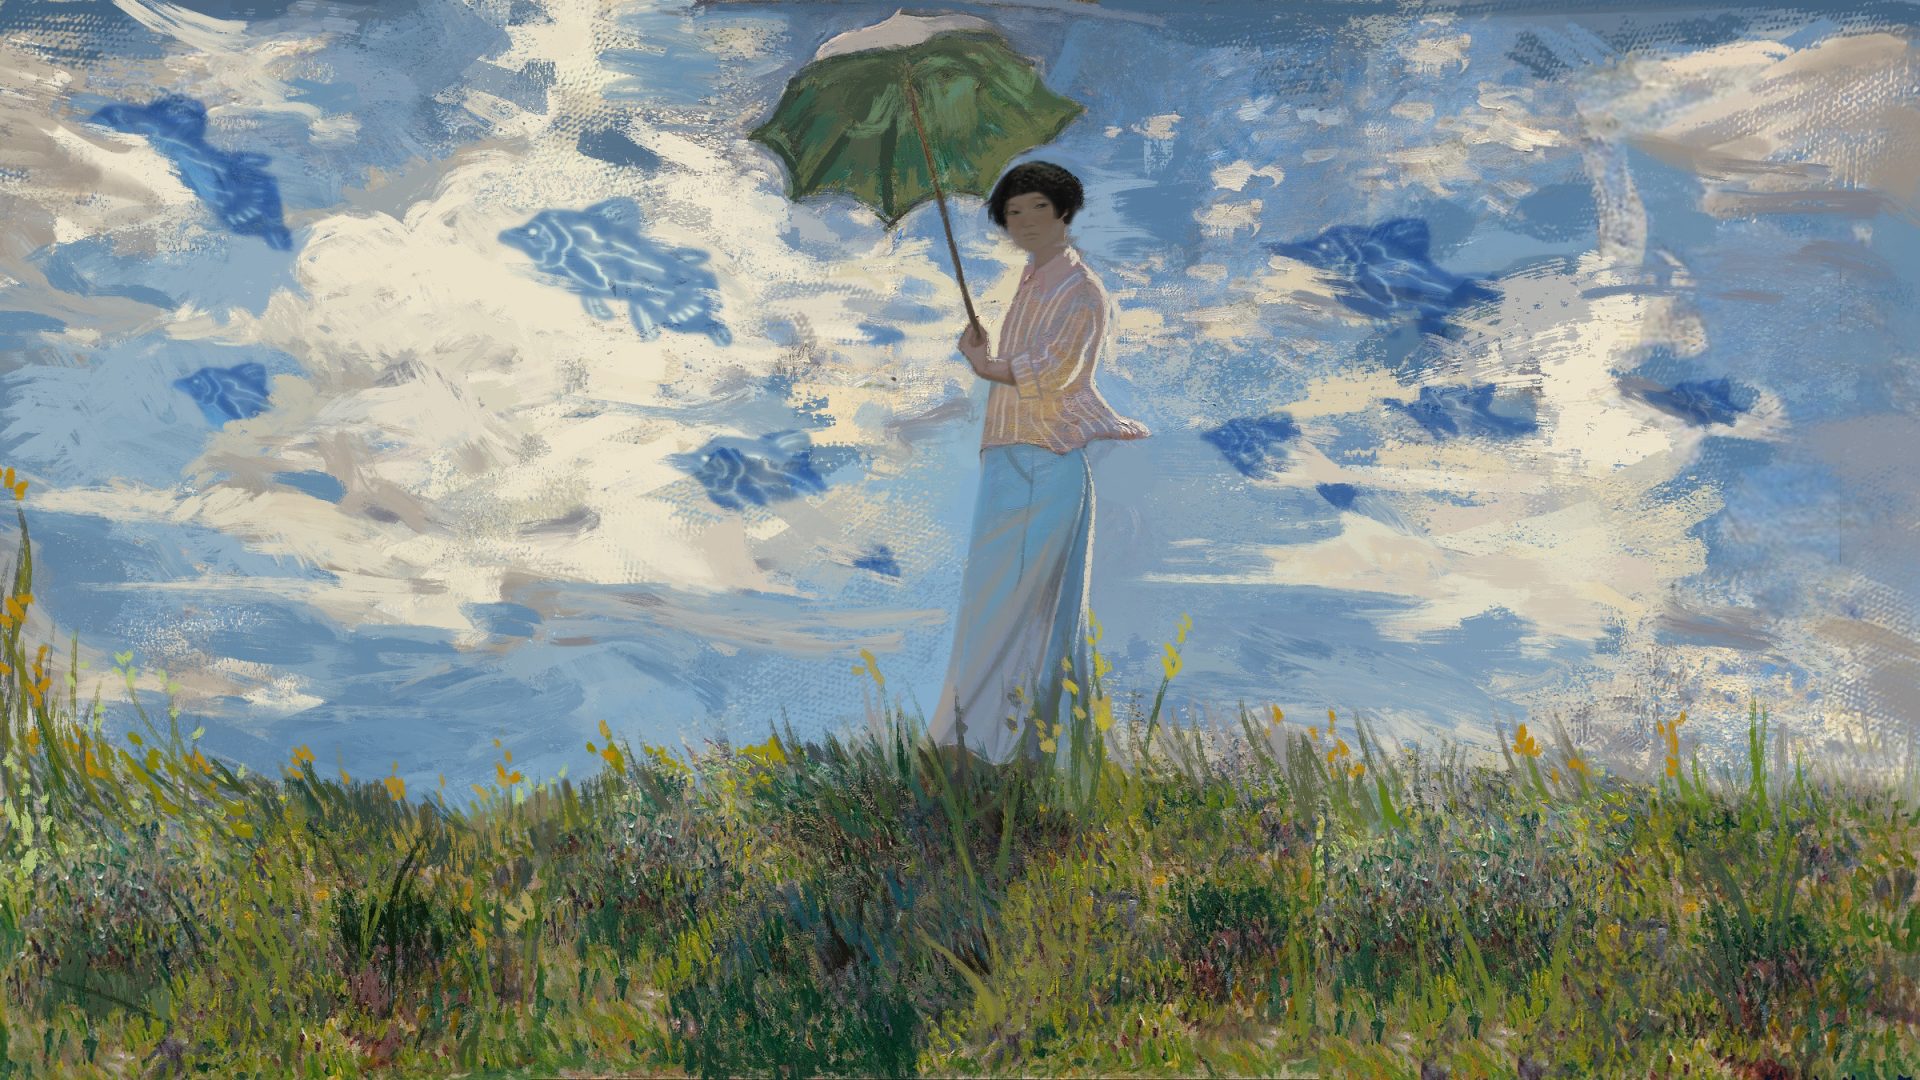 Portrait of Meemann Chang in the style of French Impressionist Claude Monet’s “Woman With a Parasol.”